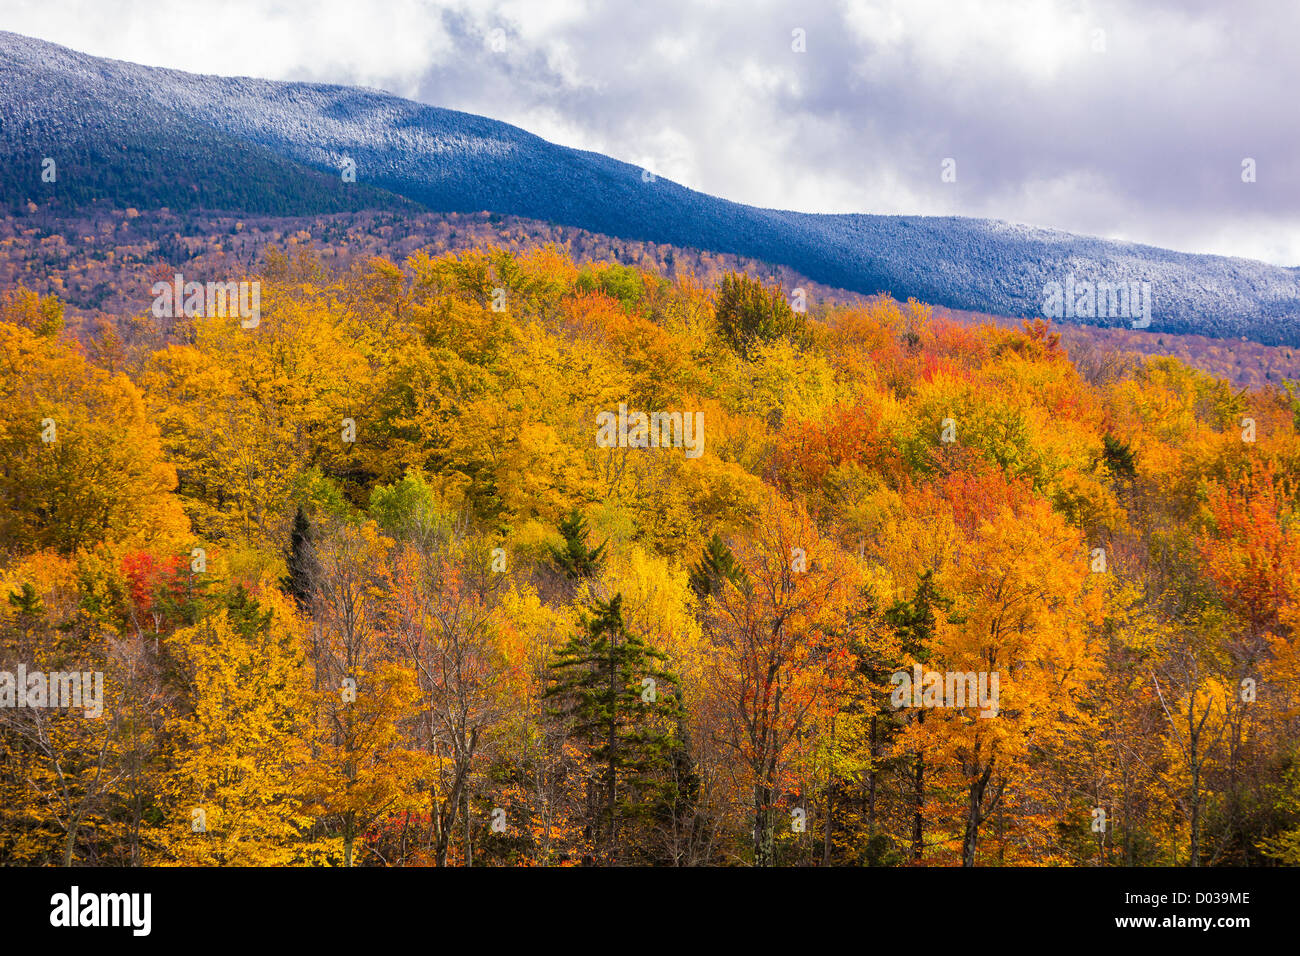 GREEN MOUNTAINS, VERMONT, USA - Autumn foliage on trees near Camel's Hump State Forest, on Route 17. Stock Photo